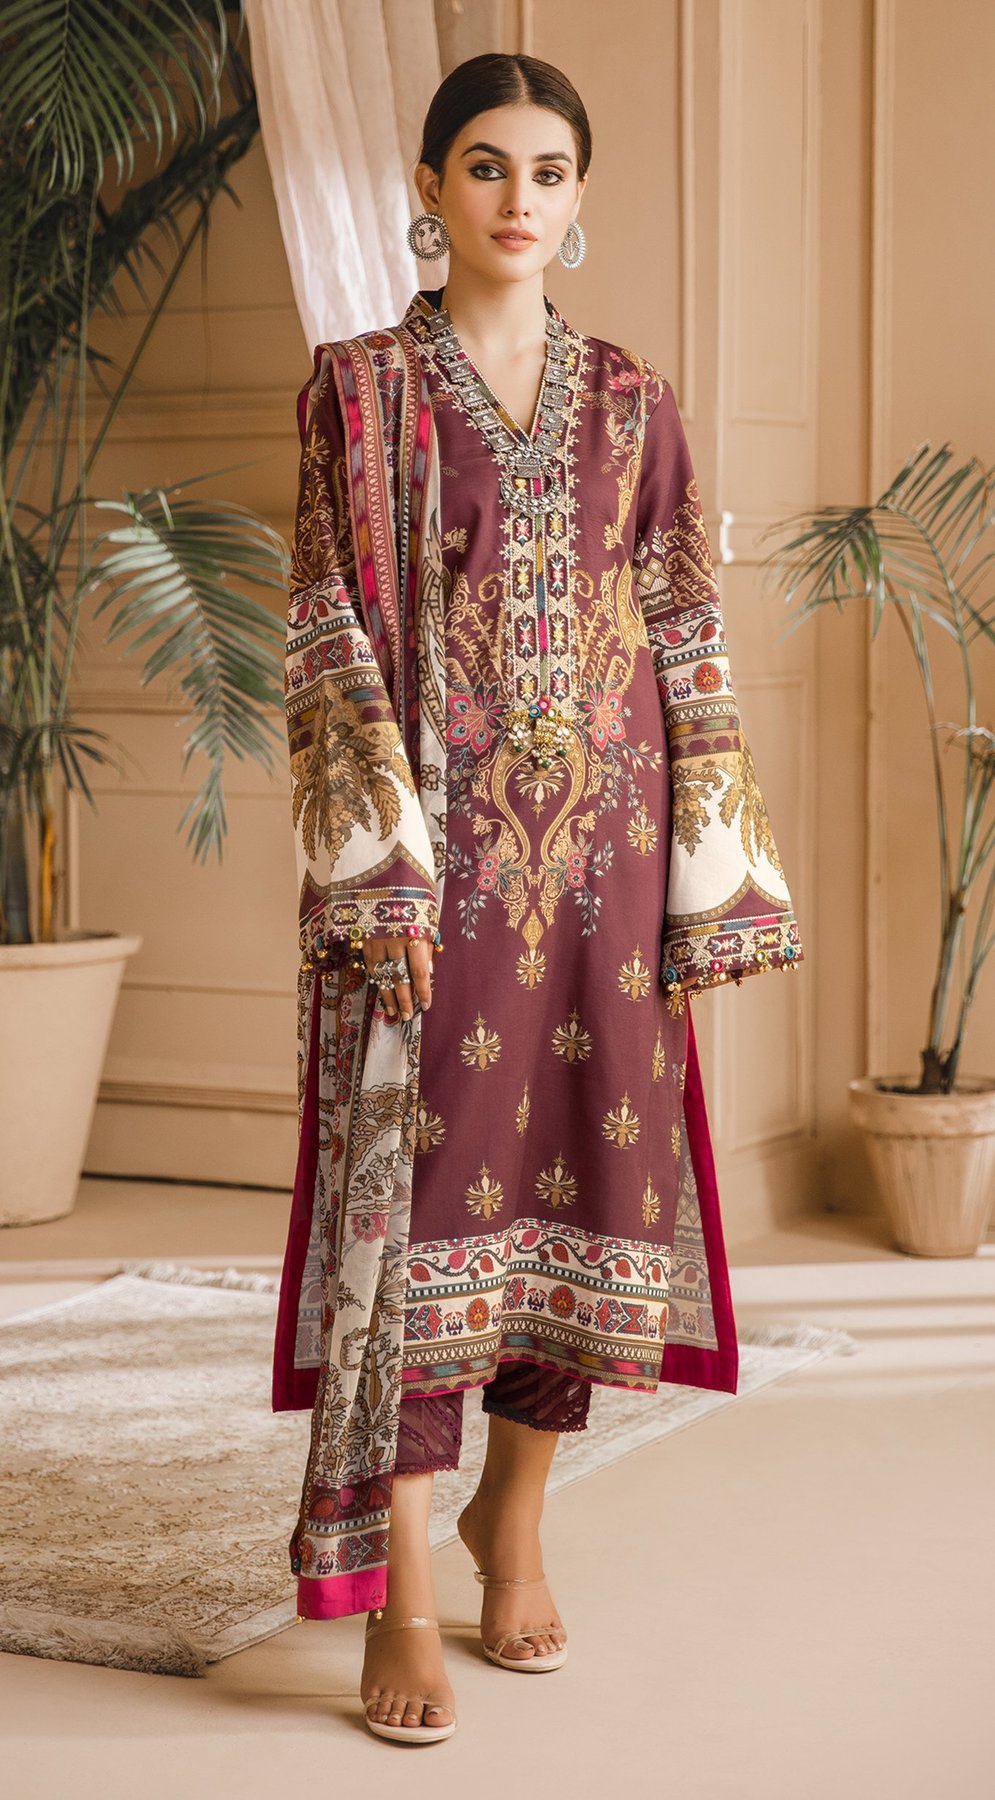 Amaya | Anaya by Kiran Chaudhry | Noor Bano | Unstitched Embroidered Cambric Collection'21